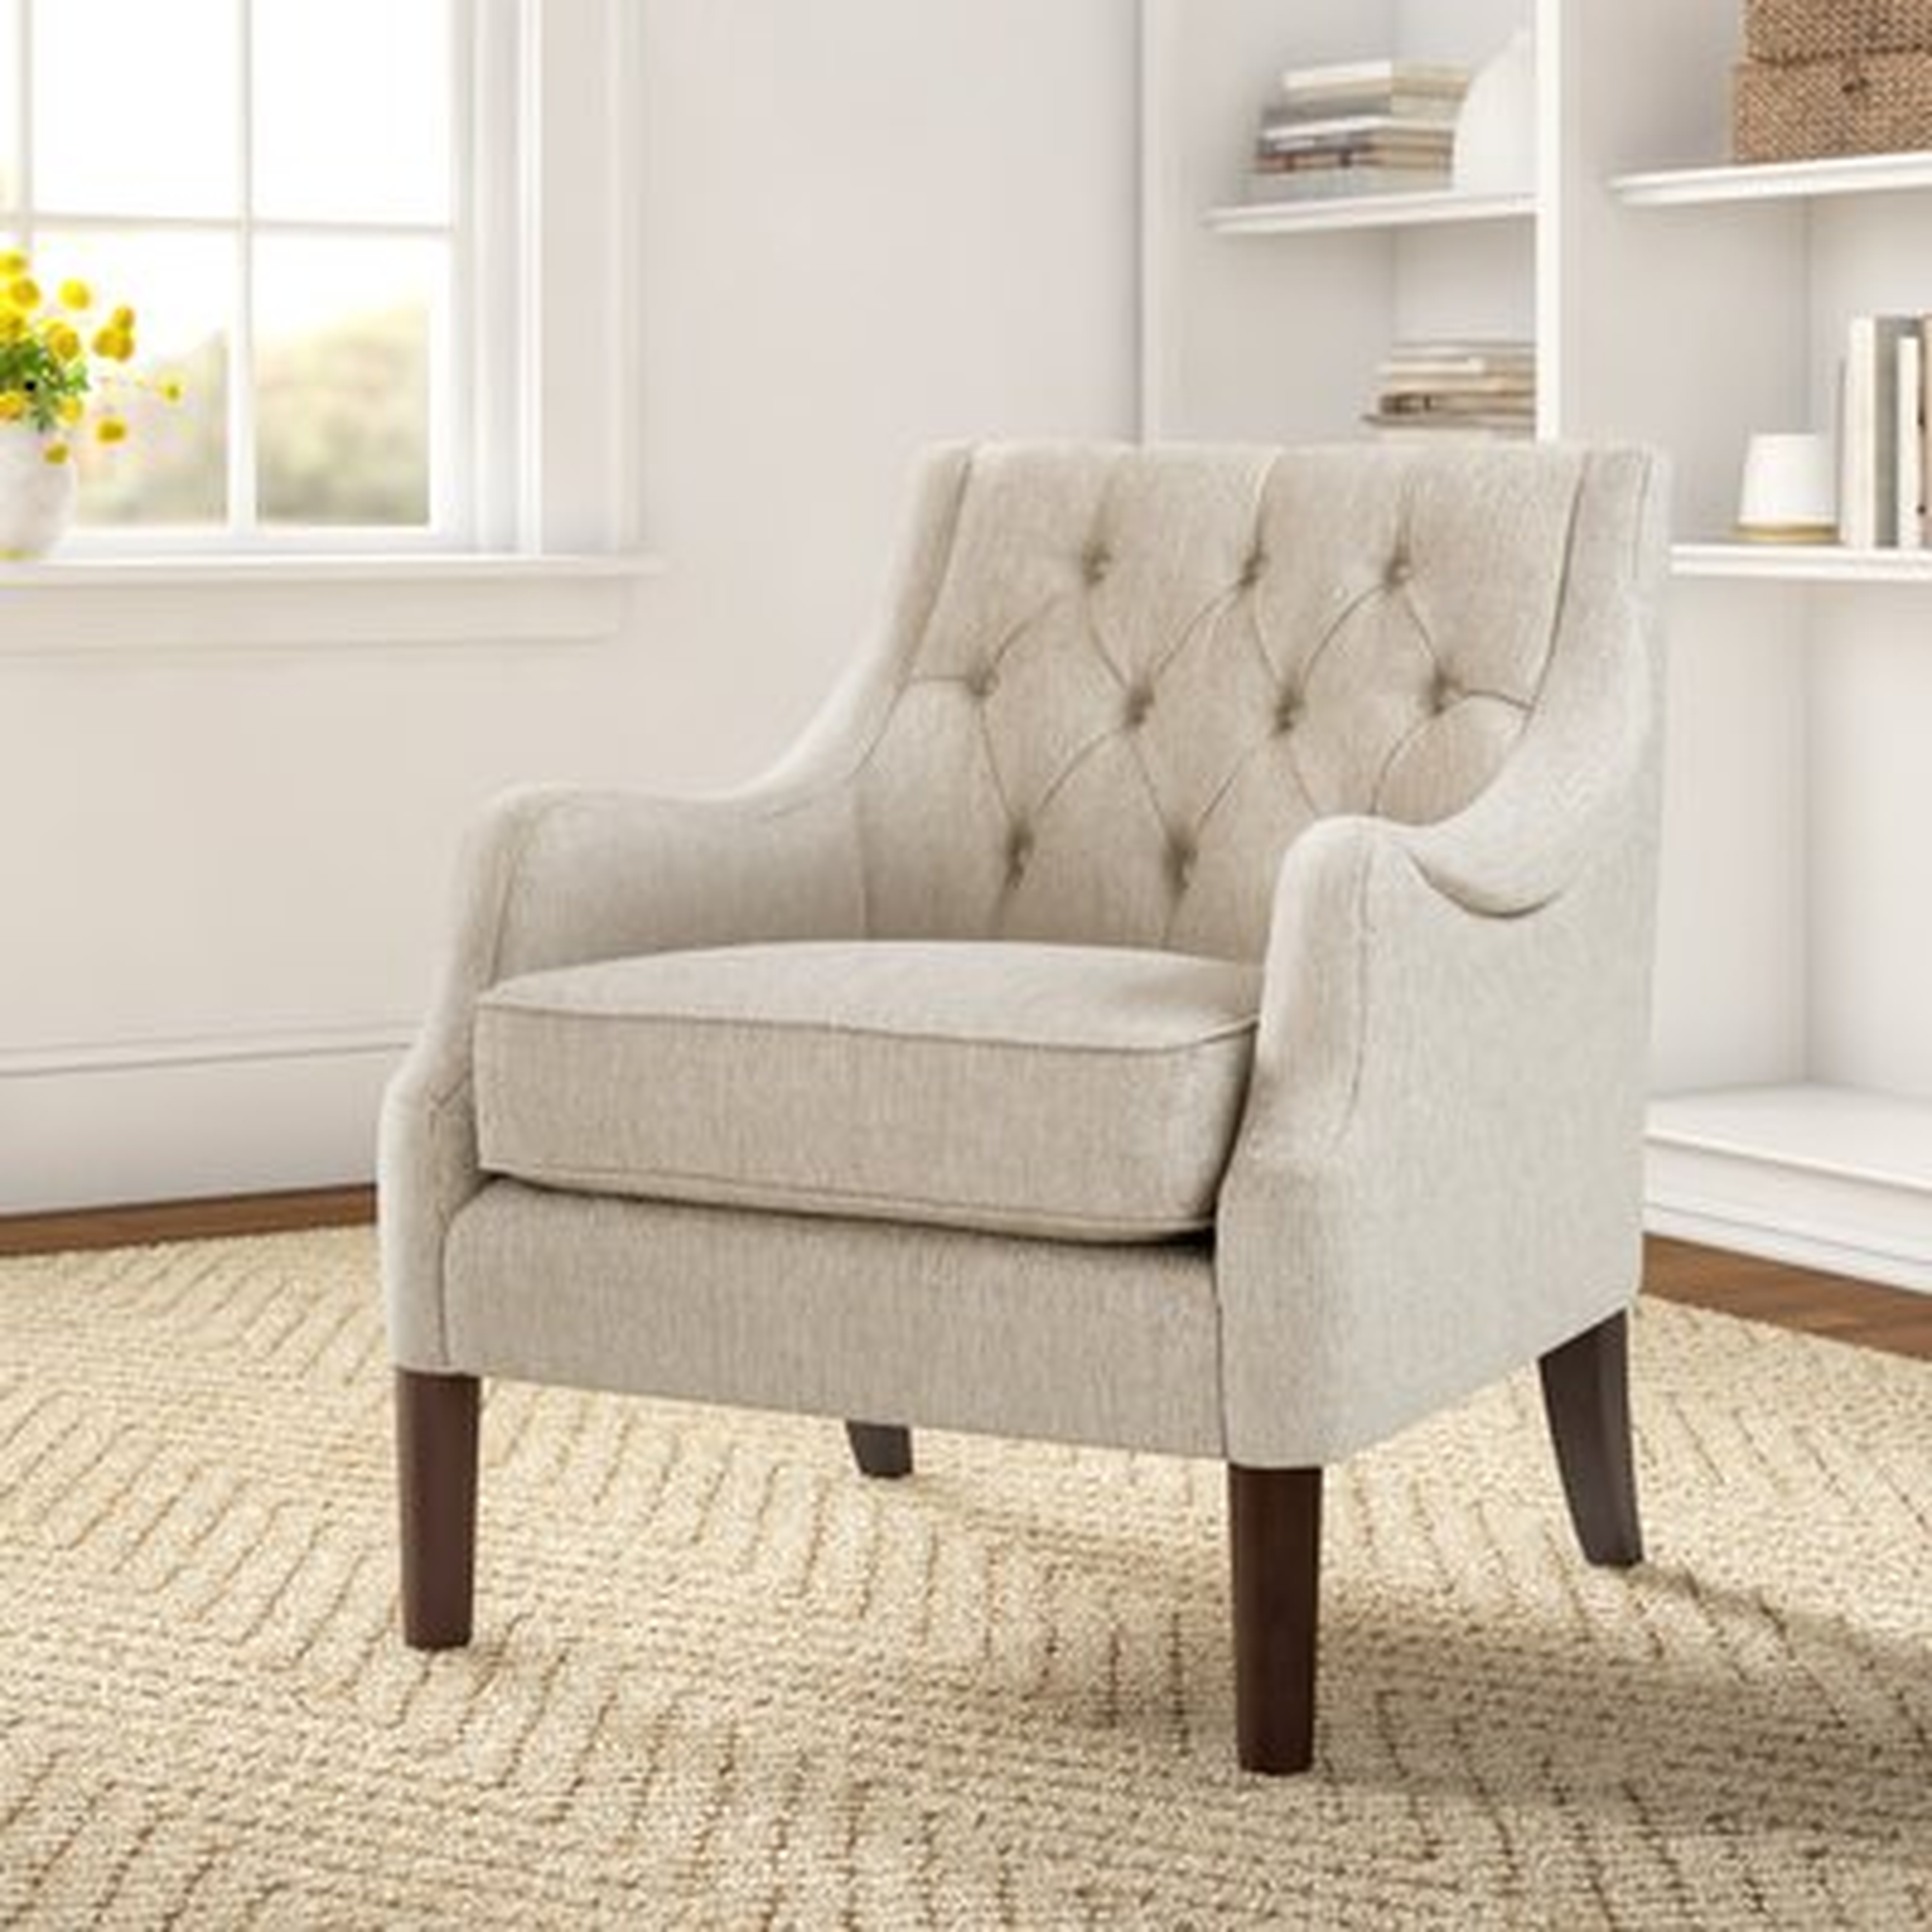 Anatonia 29.25" Wide Tufted Polyester Wingback Chair - Birch Lane